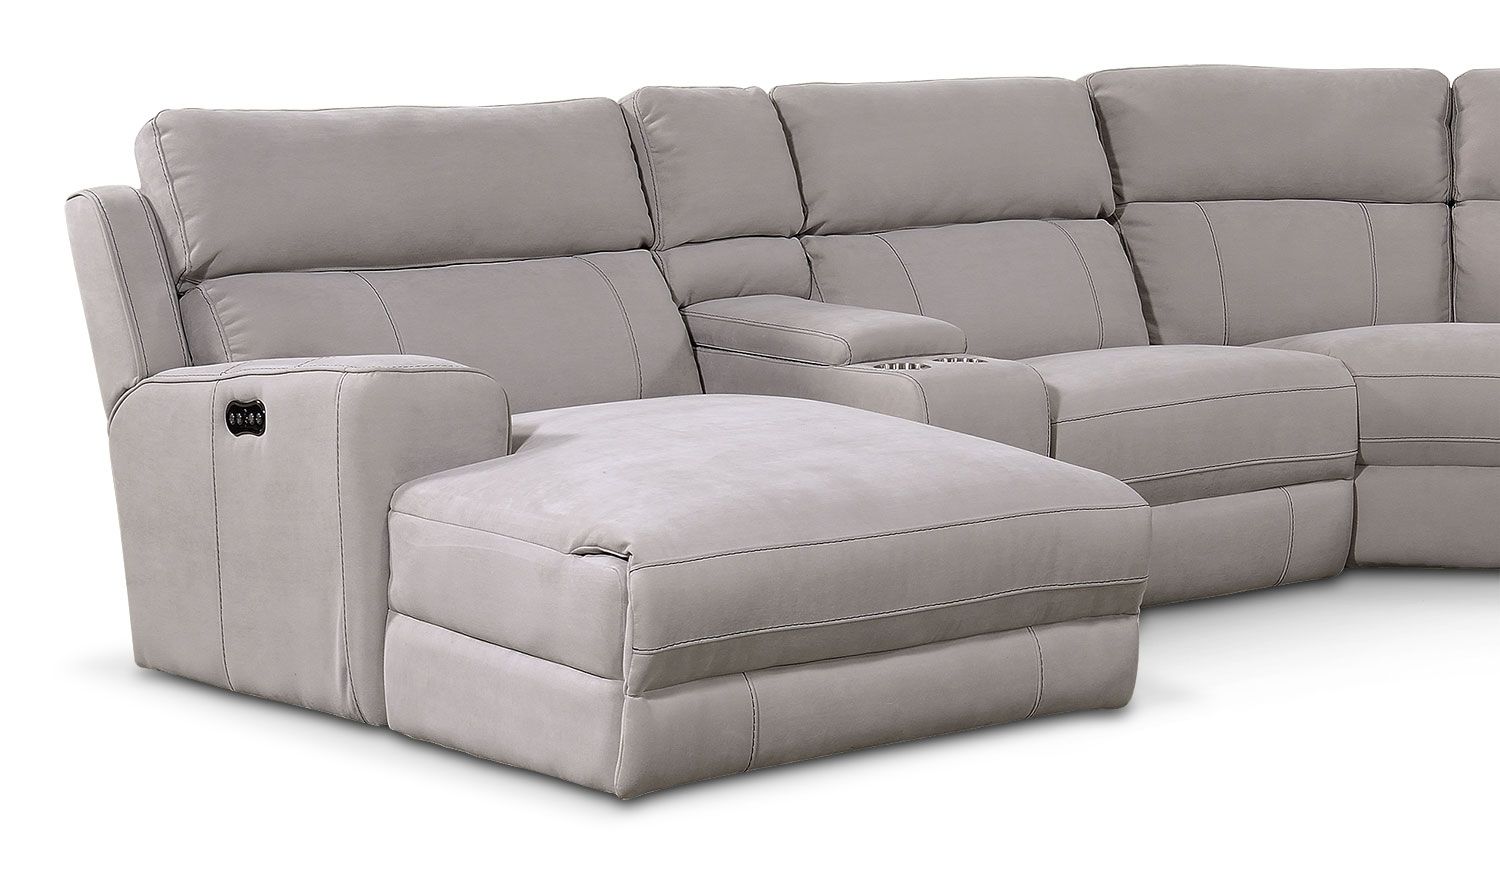 Newport 6 Piece Power Reclining Sectional With Left Facing Intended For Copenhagen Reclining Sectional Sofas With Left Storage Chaise (View 9 of 15)